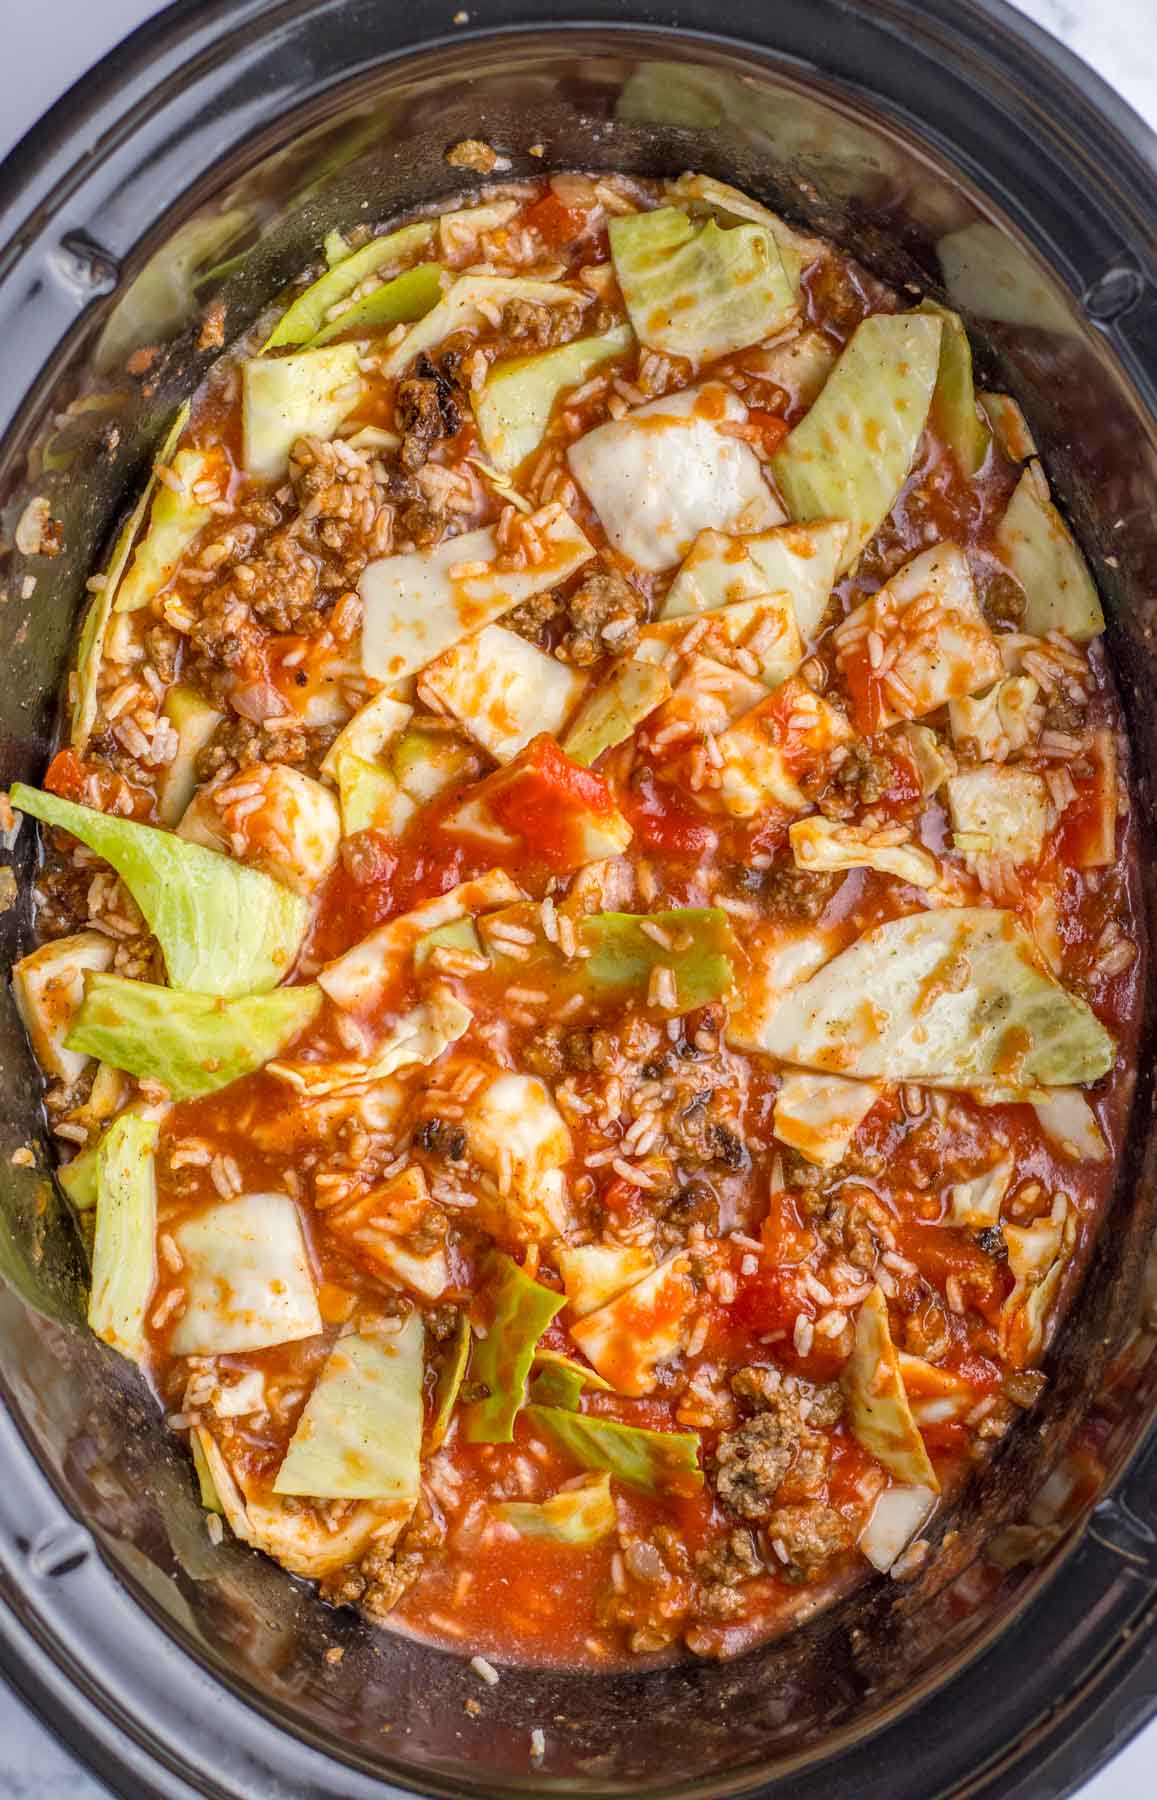 A crock pot filled with cabbage and meat.